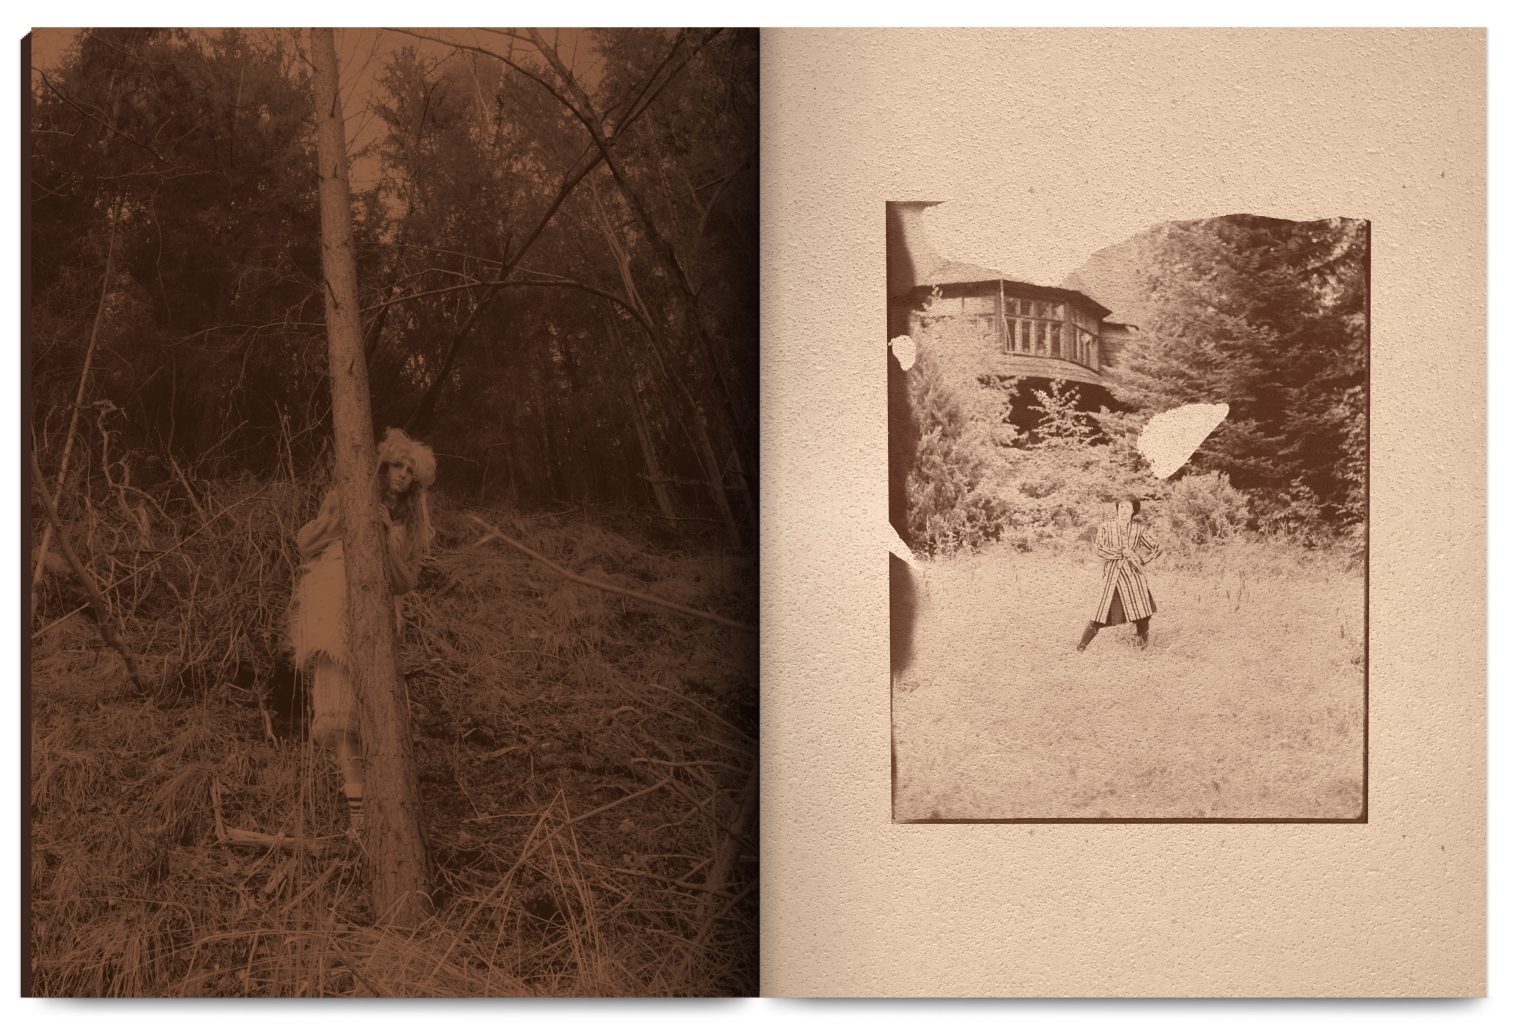 Artist book Her Hauntology – Paulina Olowska, published by Kistefos Museum, designed by In the shade of a tree studio.